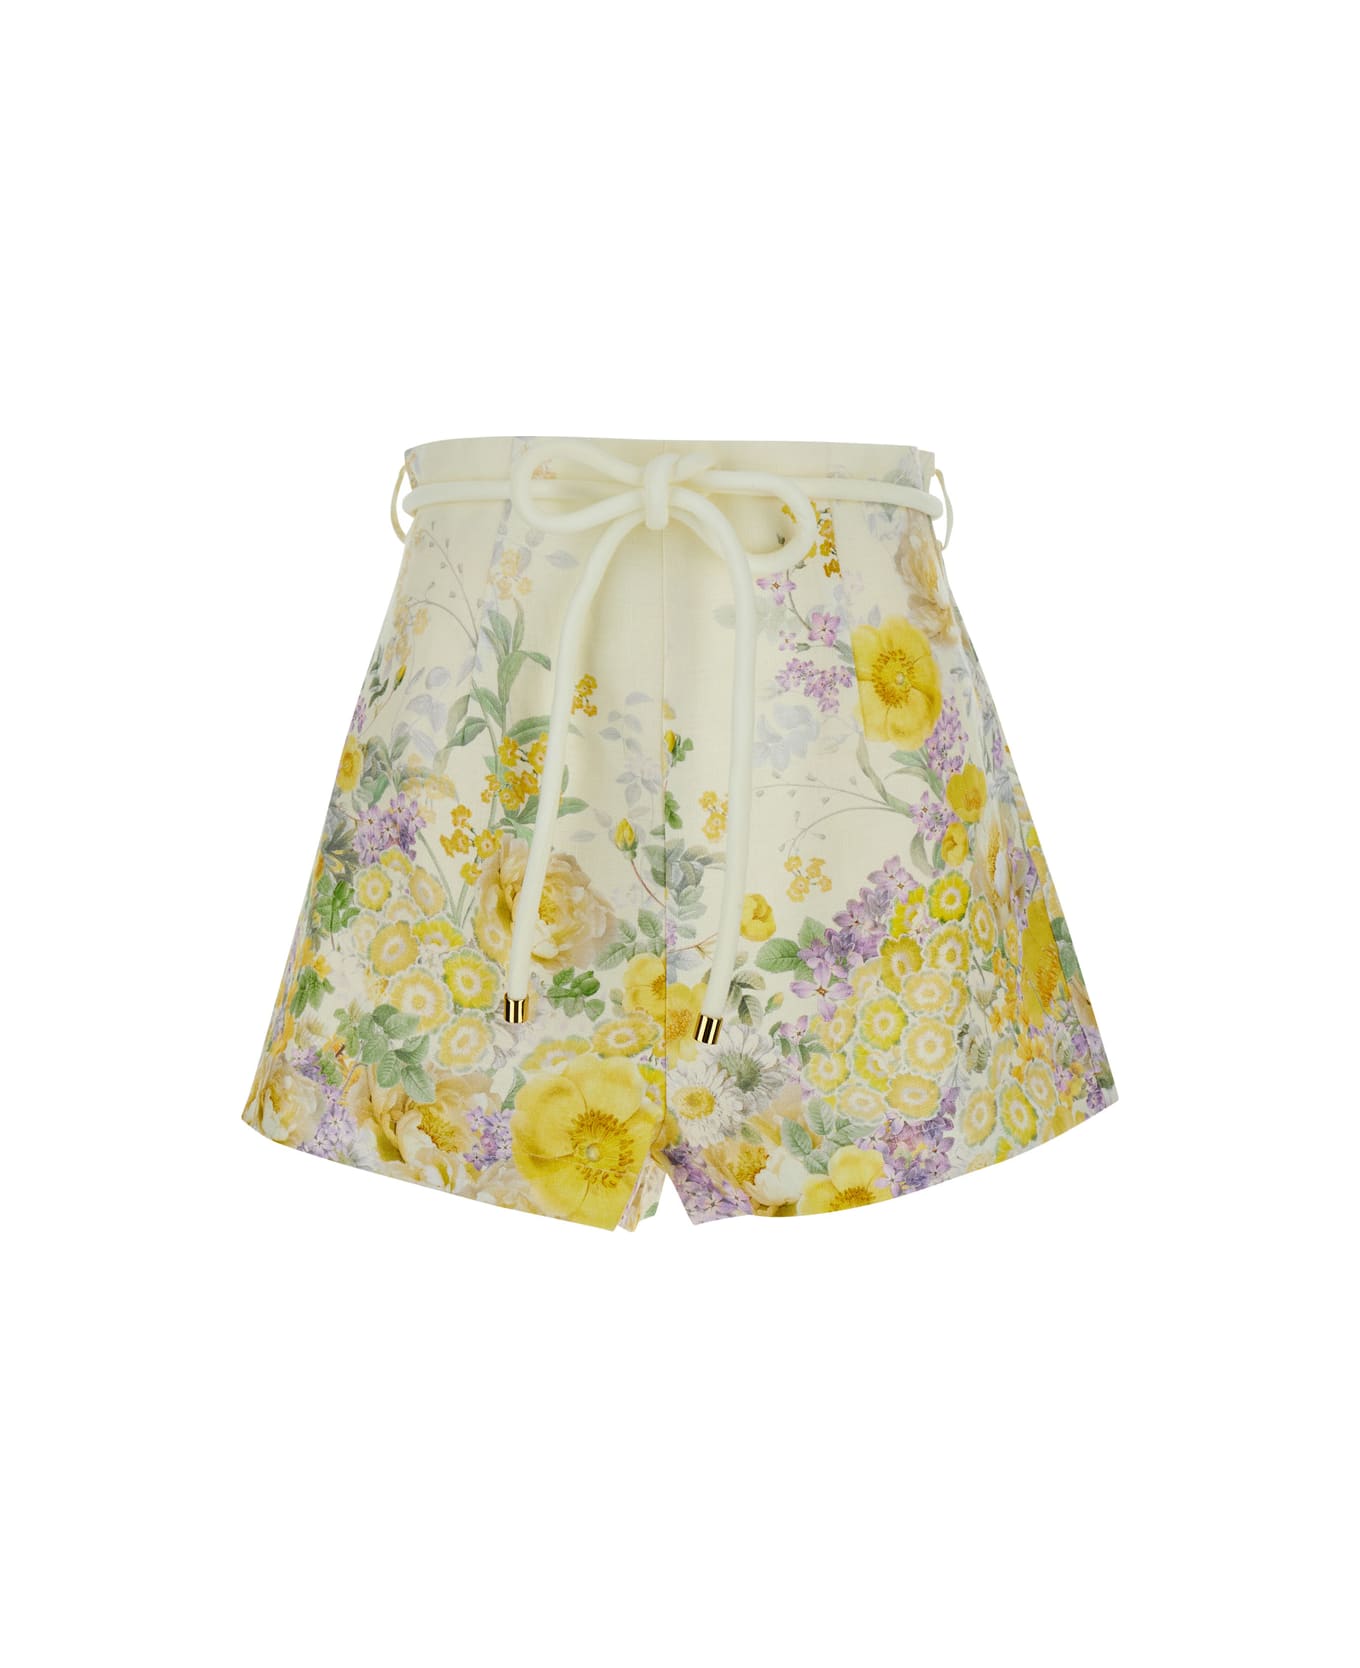 Zimmermann Yellow Bermuda Shorts With Floral Print In Linen Woman - Yellow